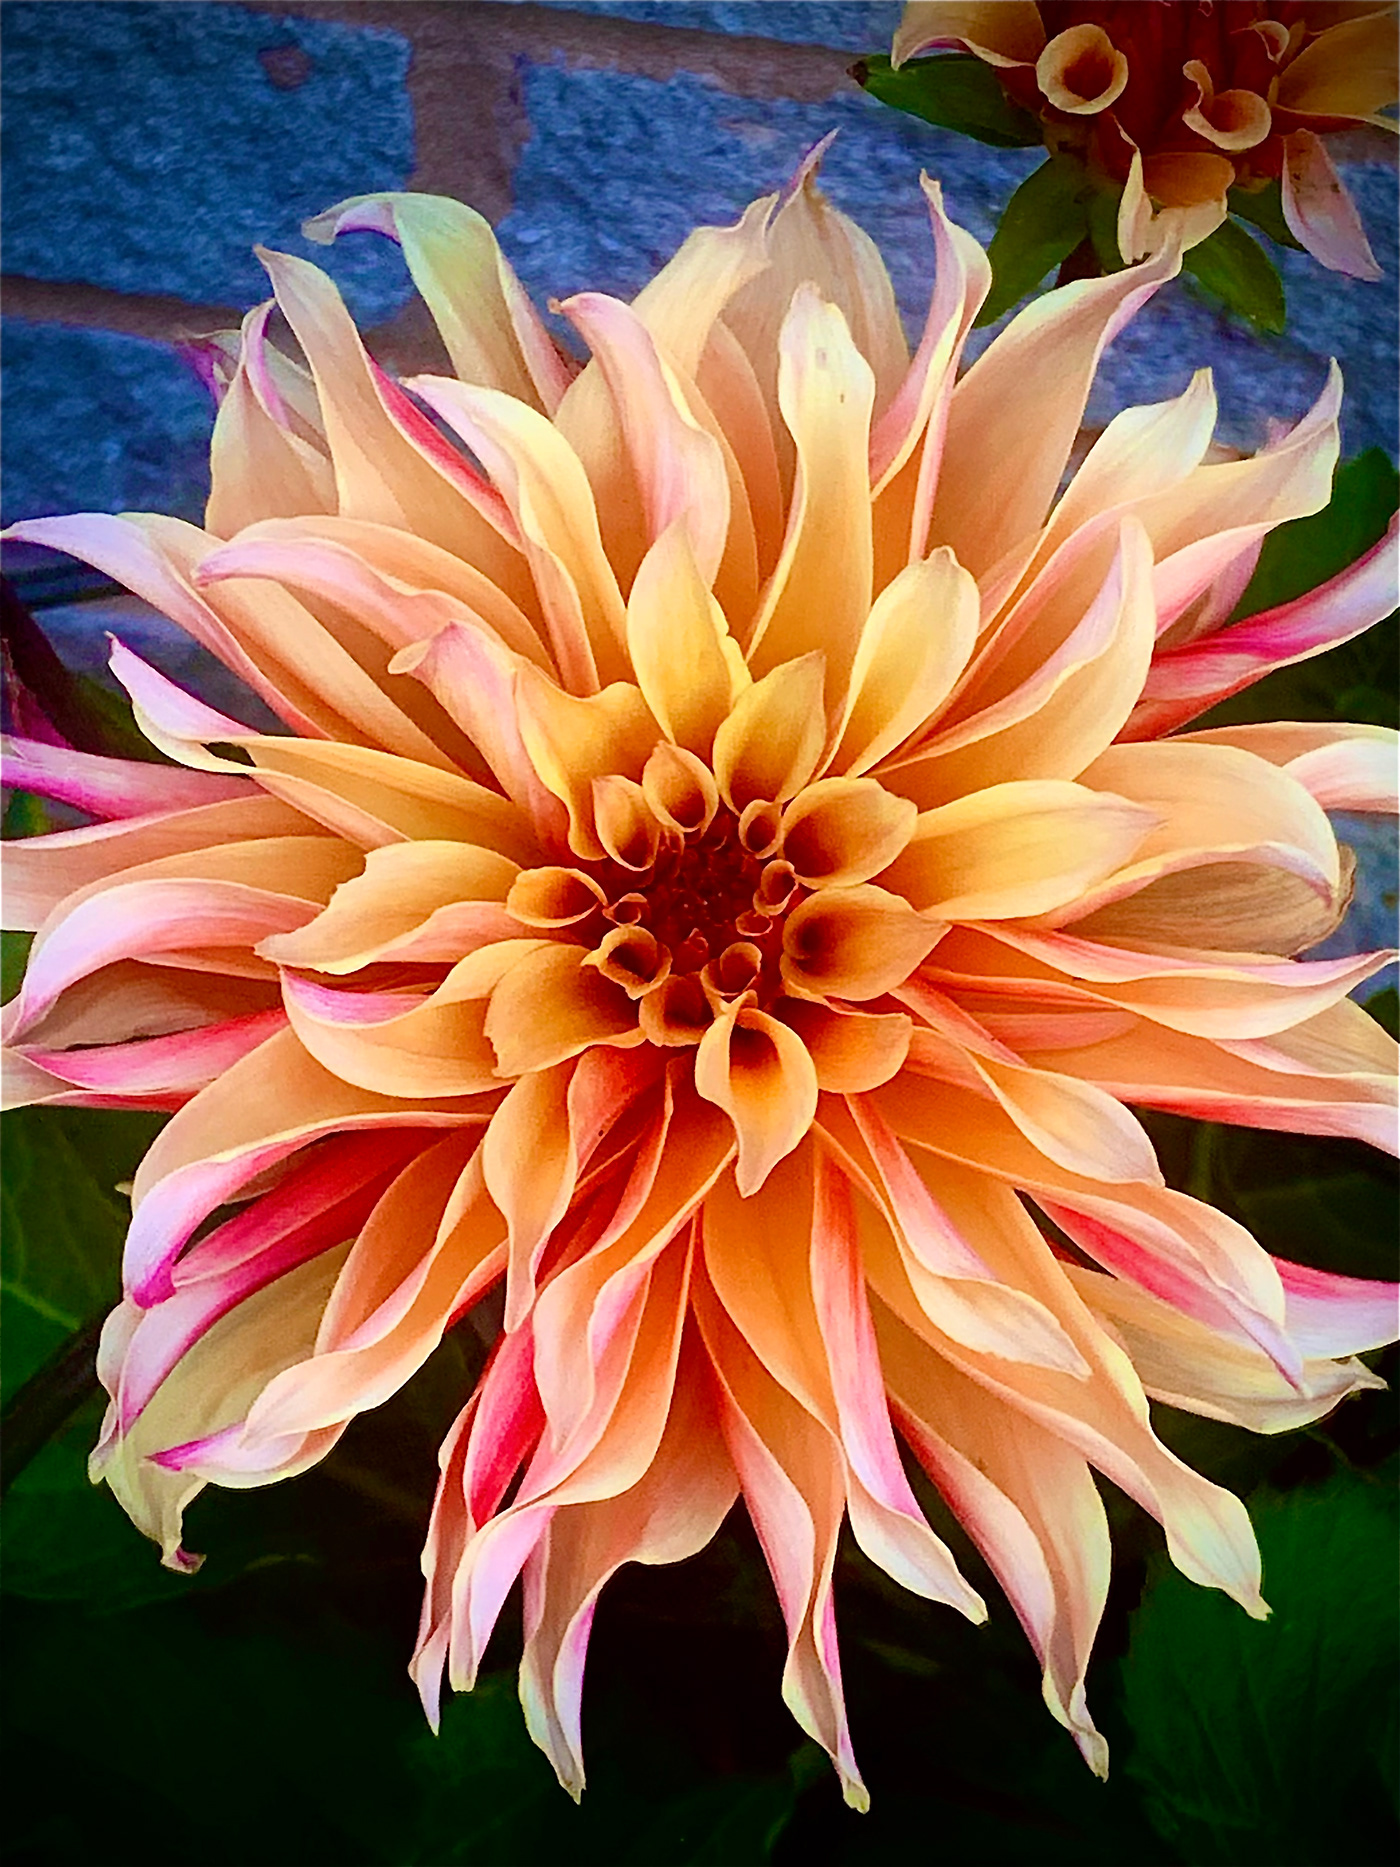 Image may contain: flower, plant and dahlia